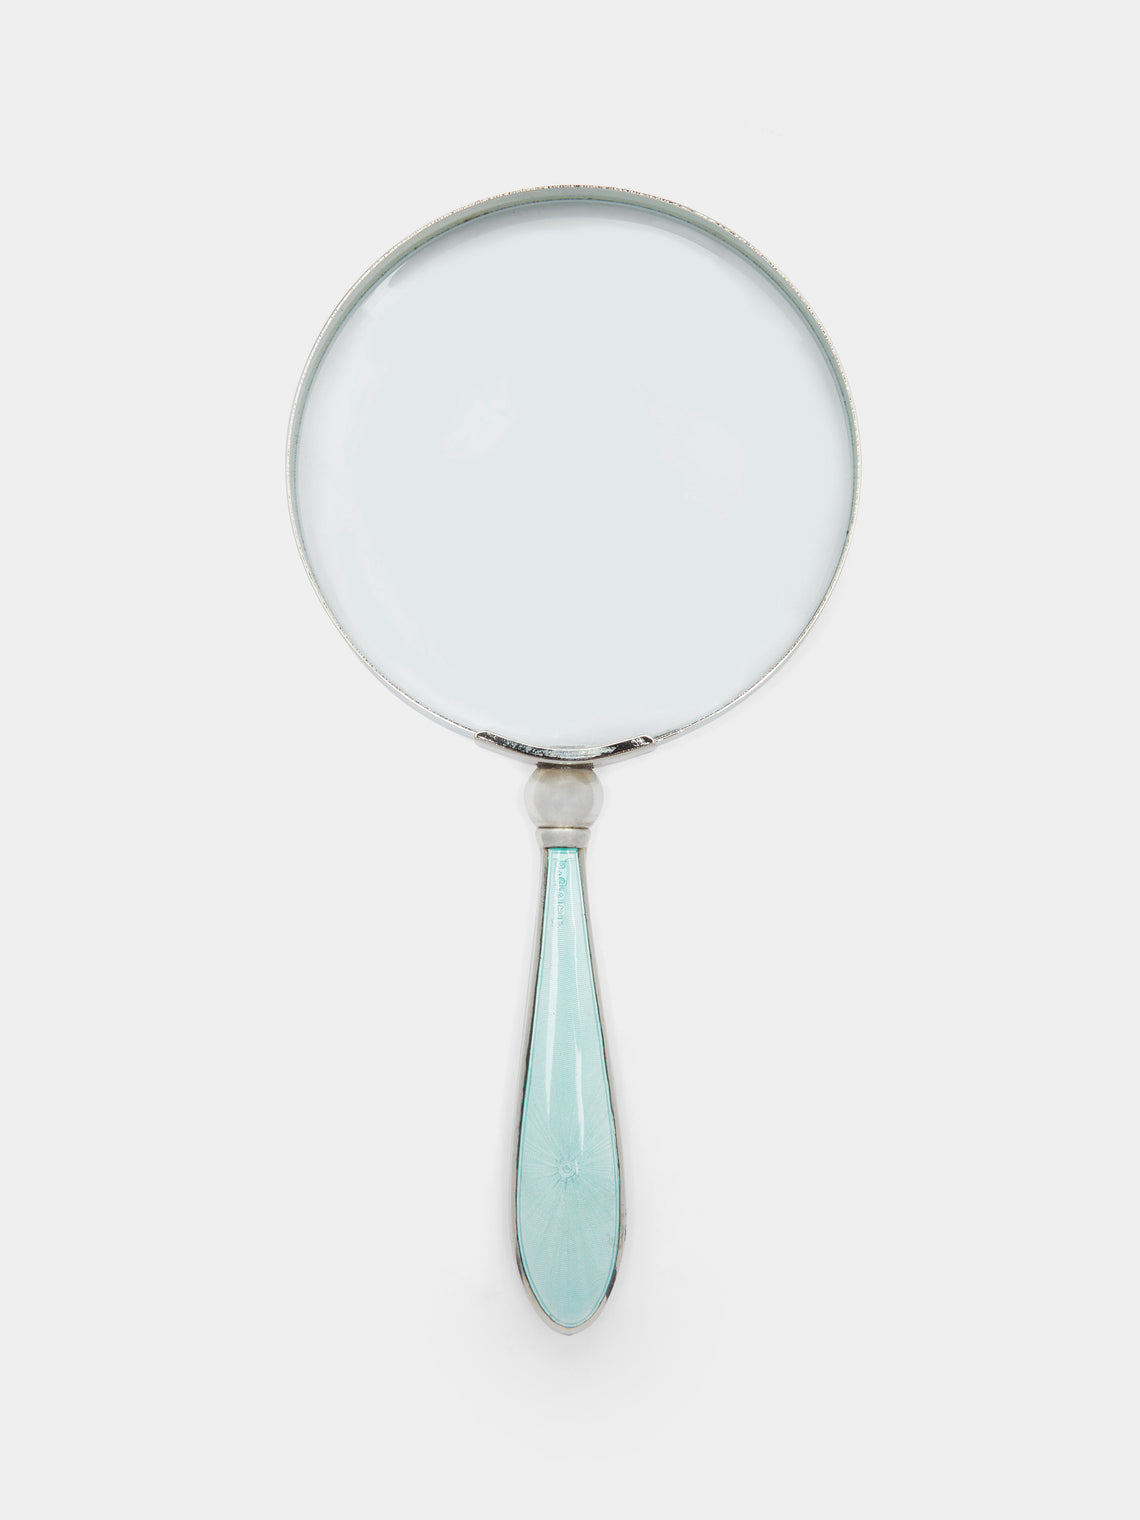 Antique and Vintage - 1920s Sterling Silver Enamel-Mounted Magnifying Glass - Blue - ABASK - 